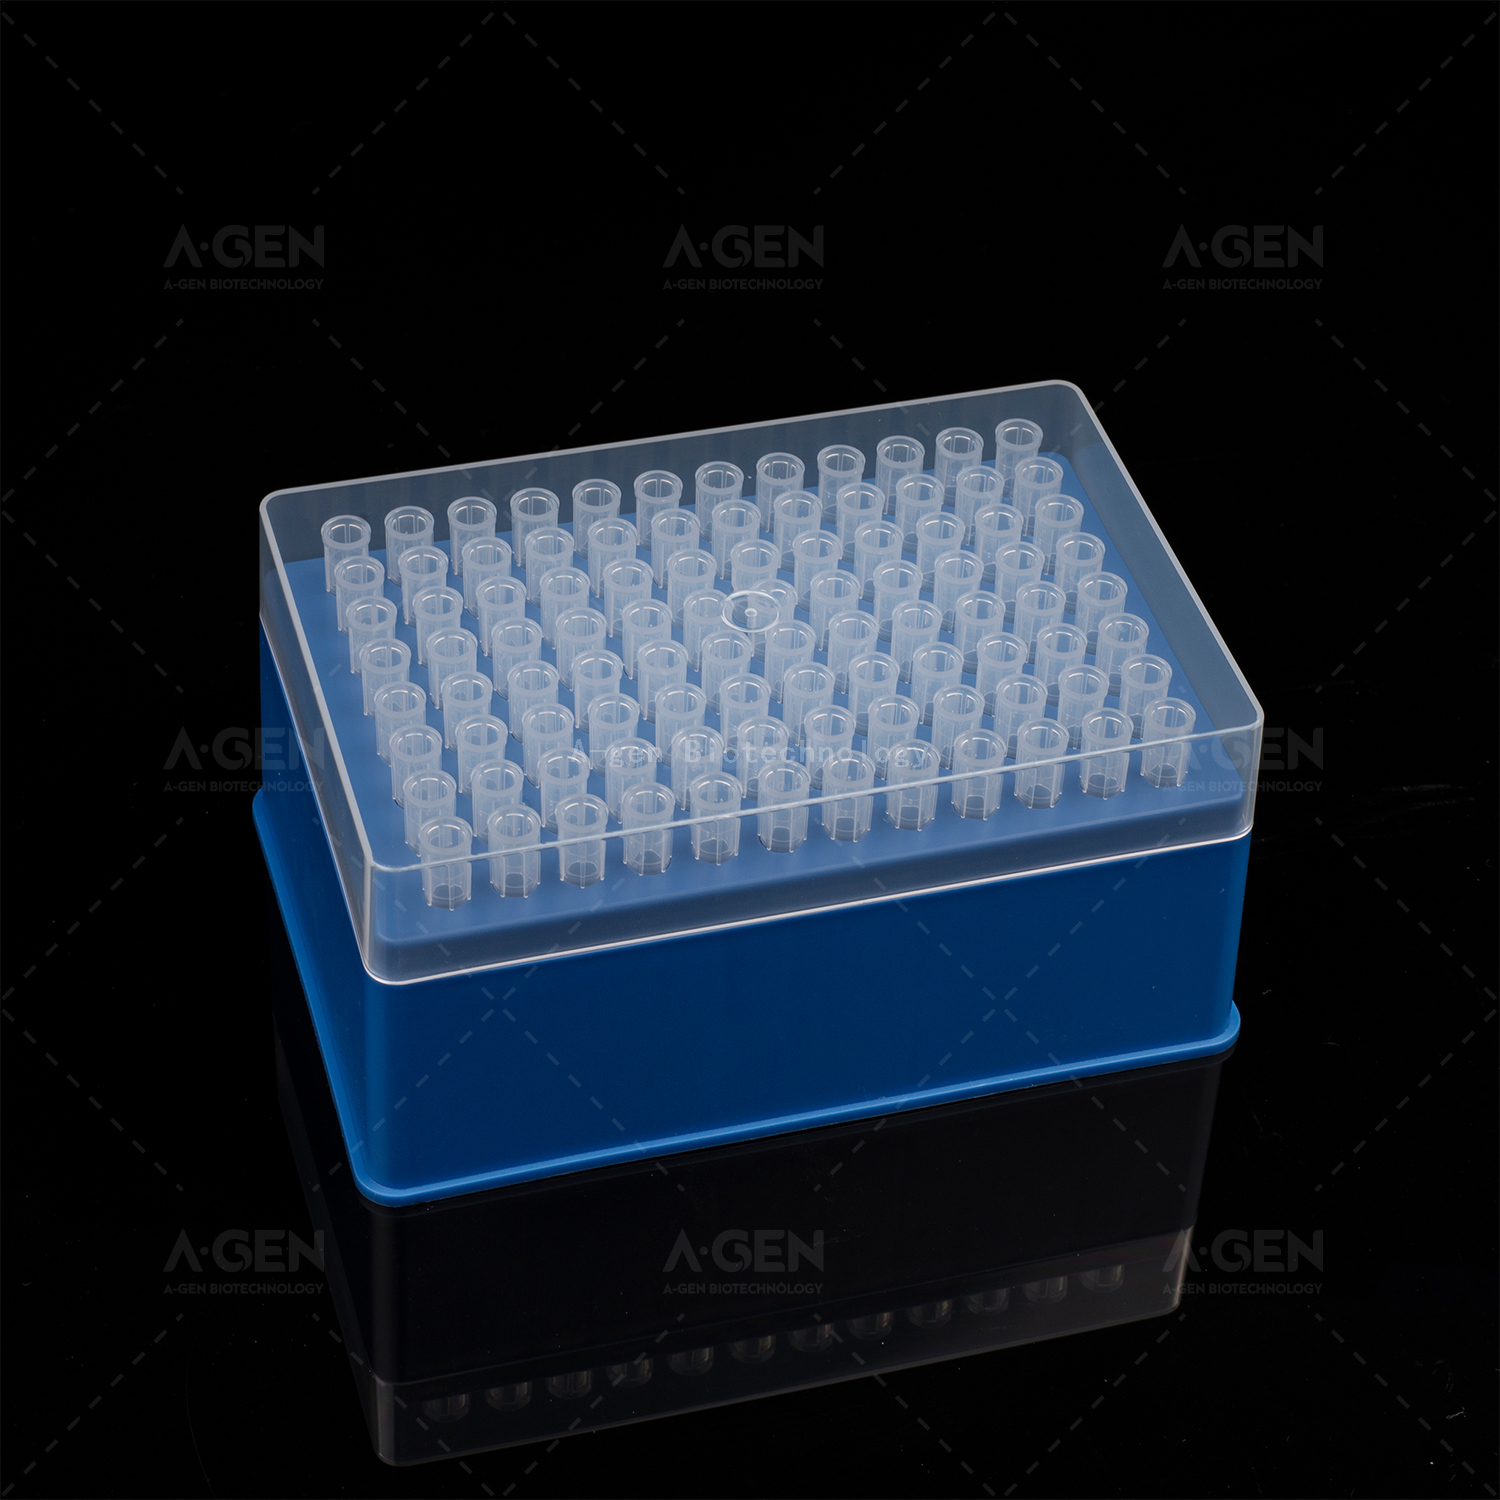 Nayo Tips 250μL Clear Robotic PP Pipette Tip (Racked,sterilized) for Liquid Transfer No Filter FX-250-RS